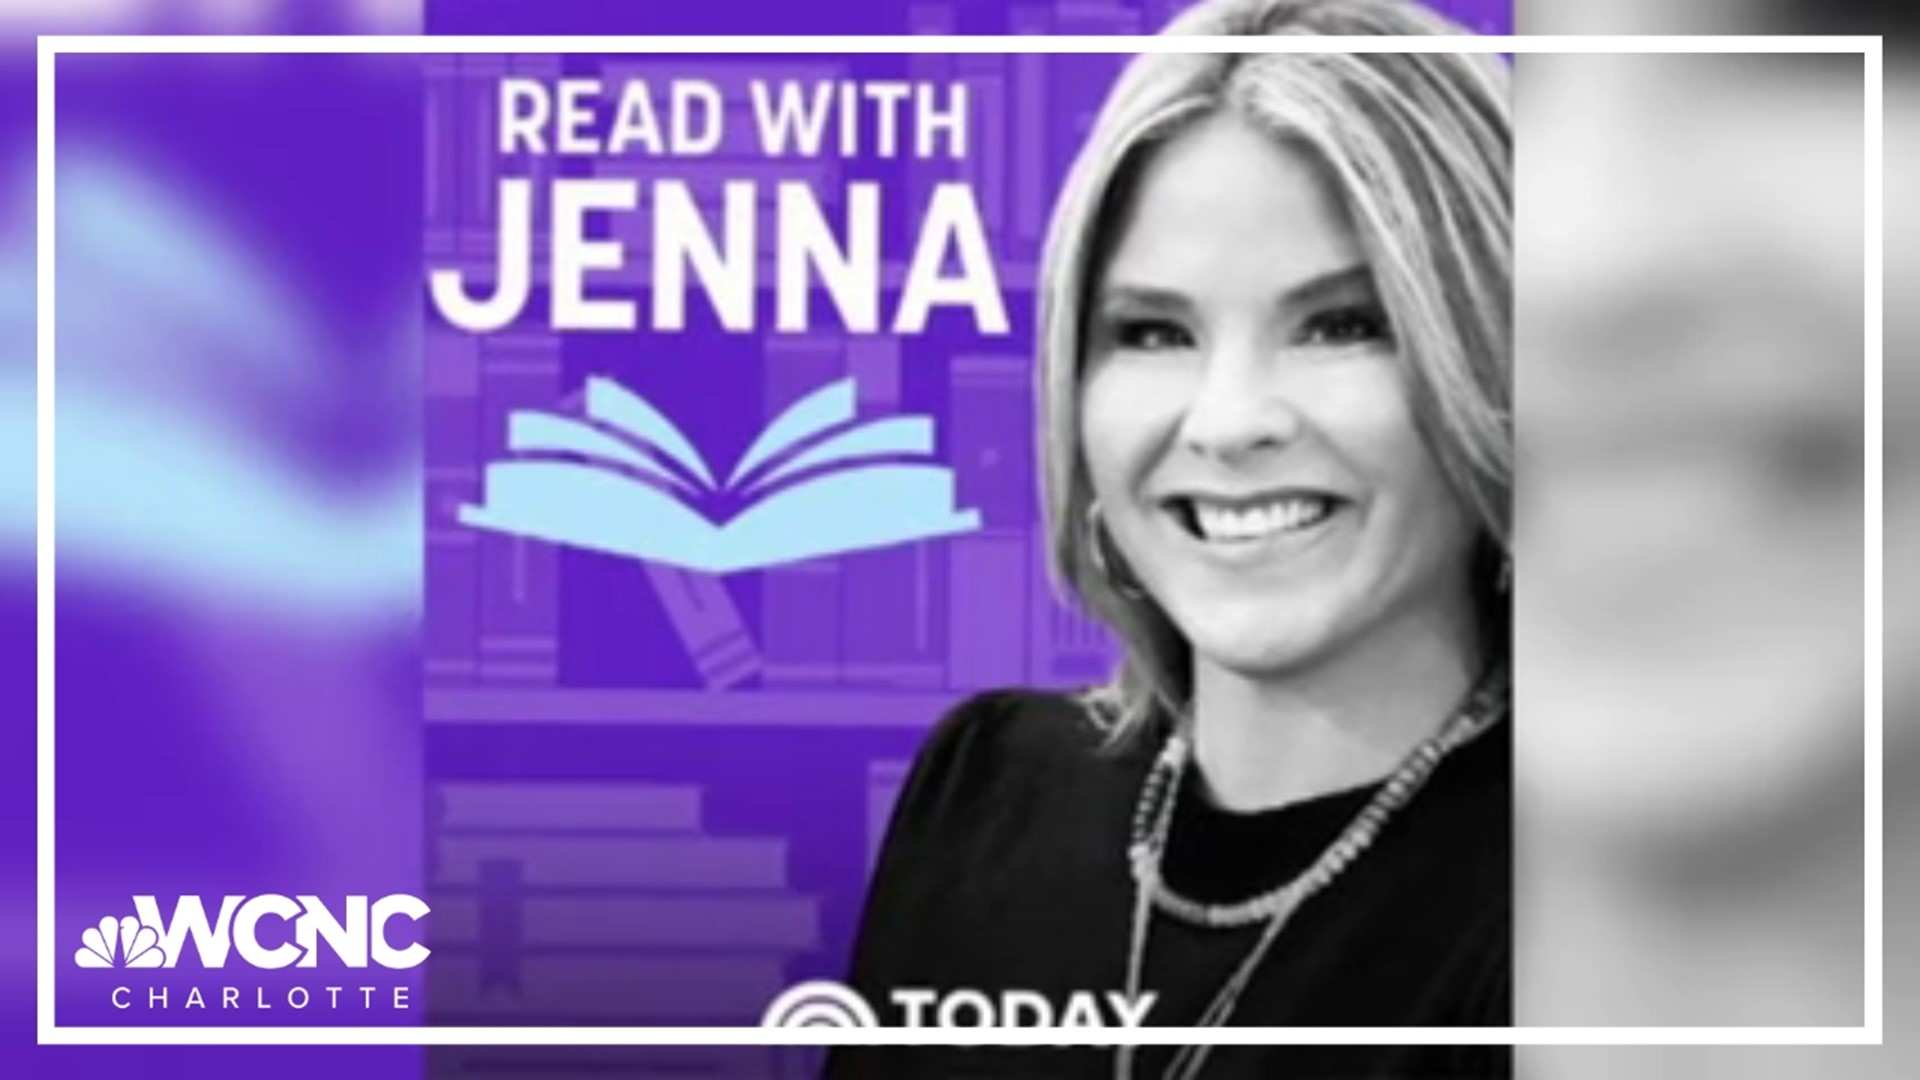 'Read with Jenna' premieres Thursday, Sept. 21.